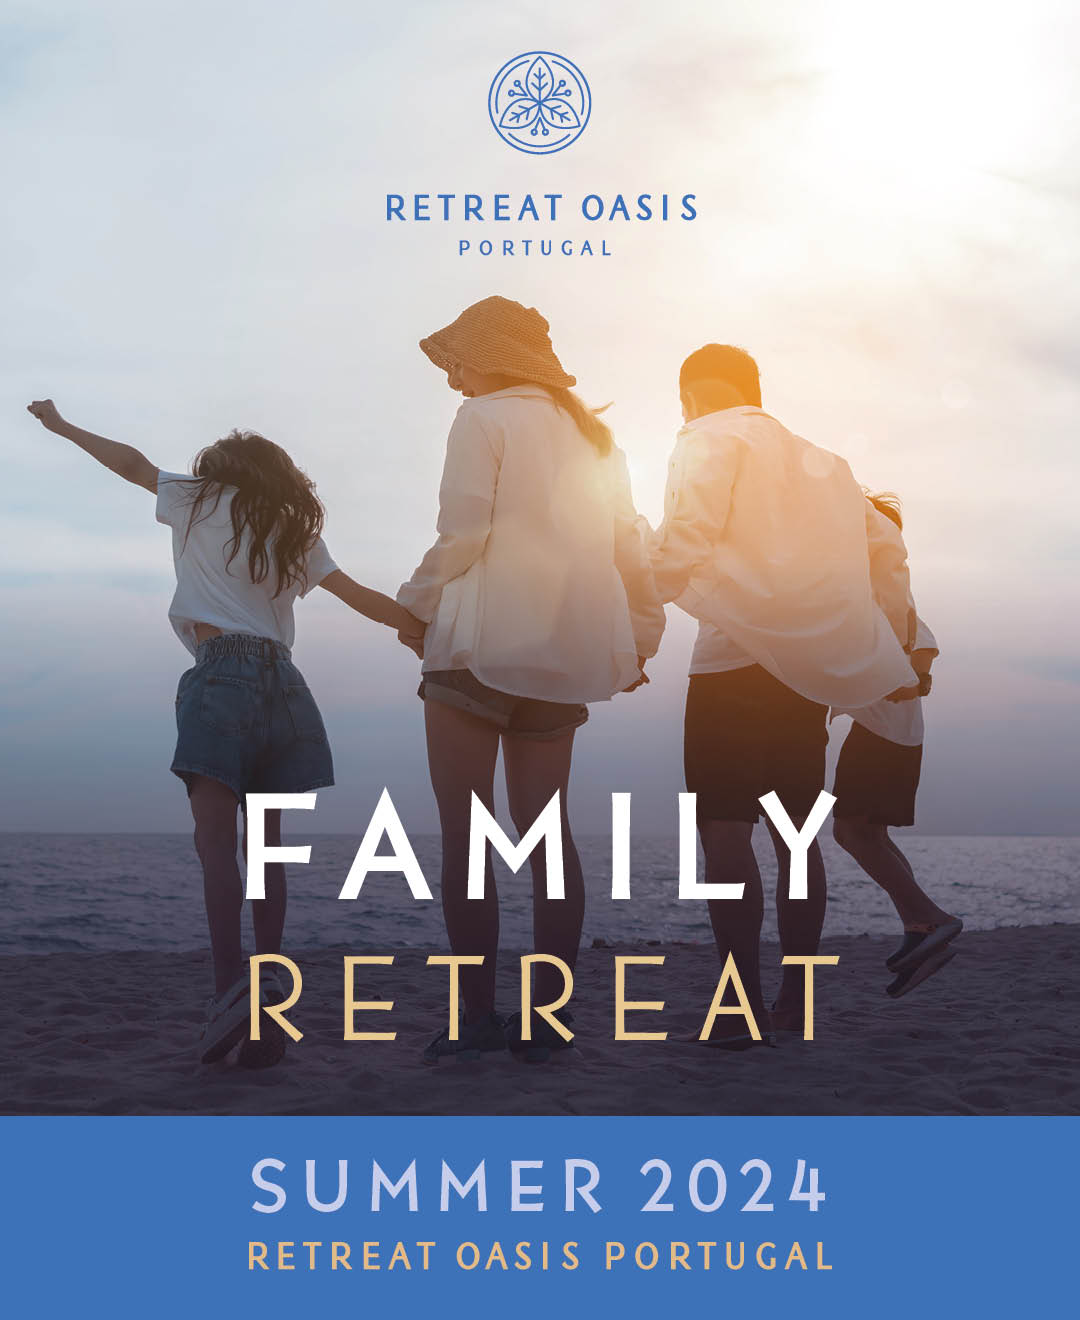 Family Retreat in Portugal July and August 2024